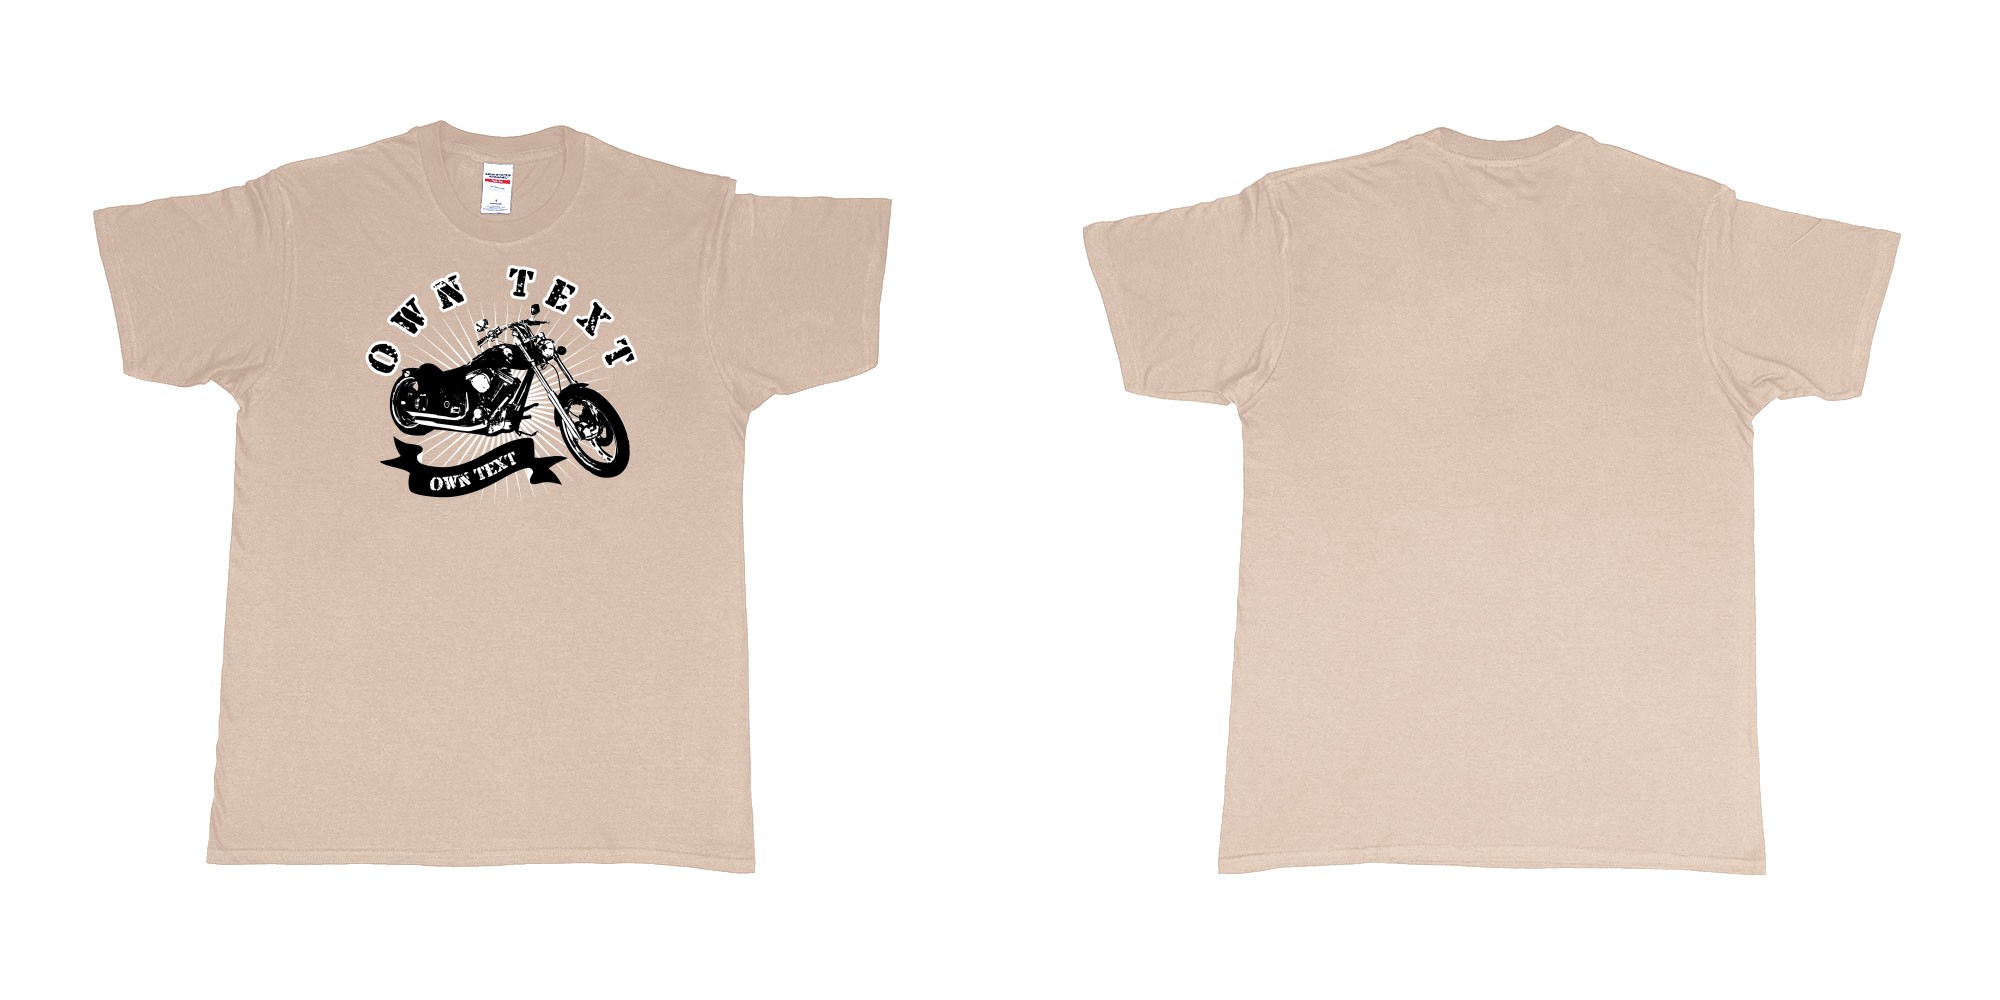 Custom tshirt design chopper motorcycle with your personalized own text printing in bali in fabric color sand choice your own text made in Bali by The Pirate Way